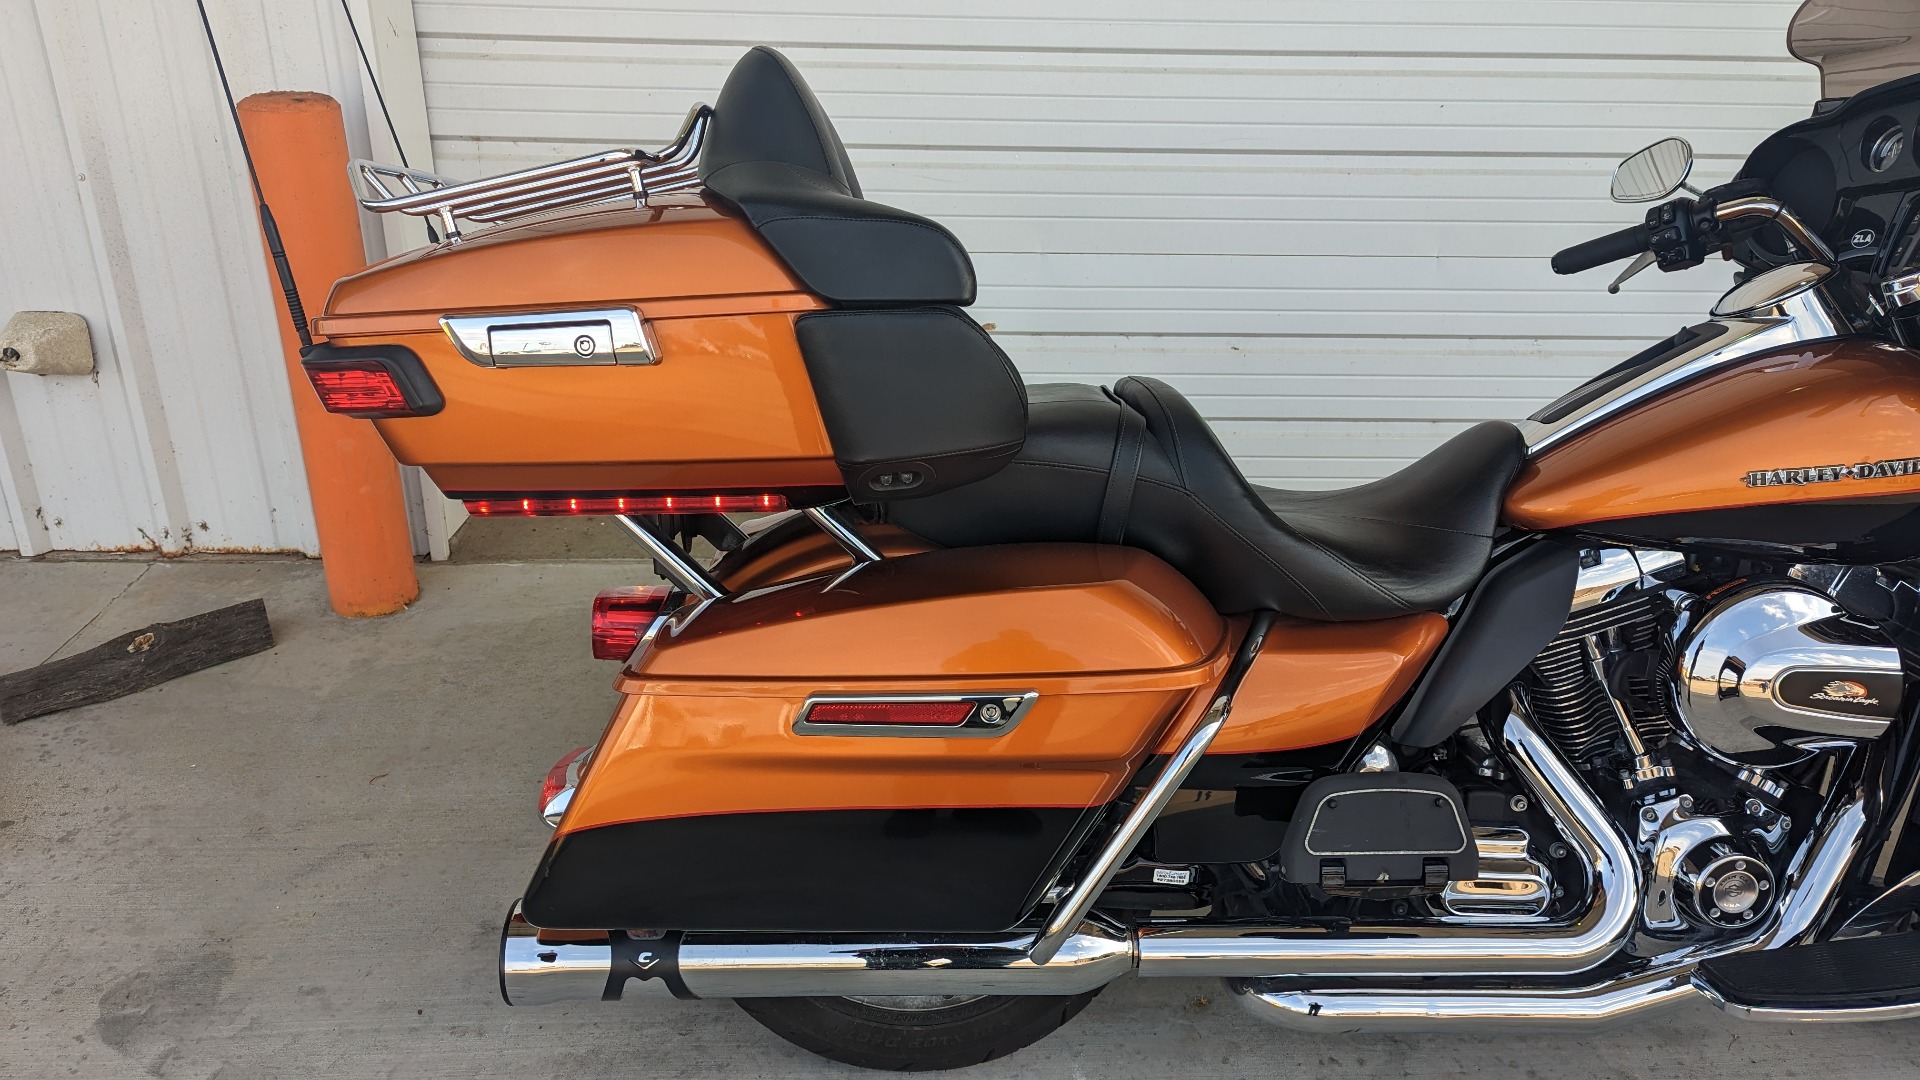 2014 harley davidson ultra limited for sale in texas - Photo 5